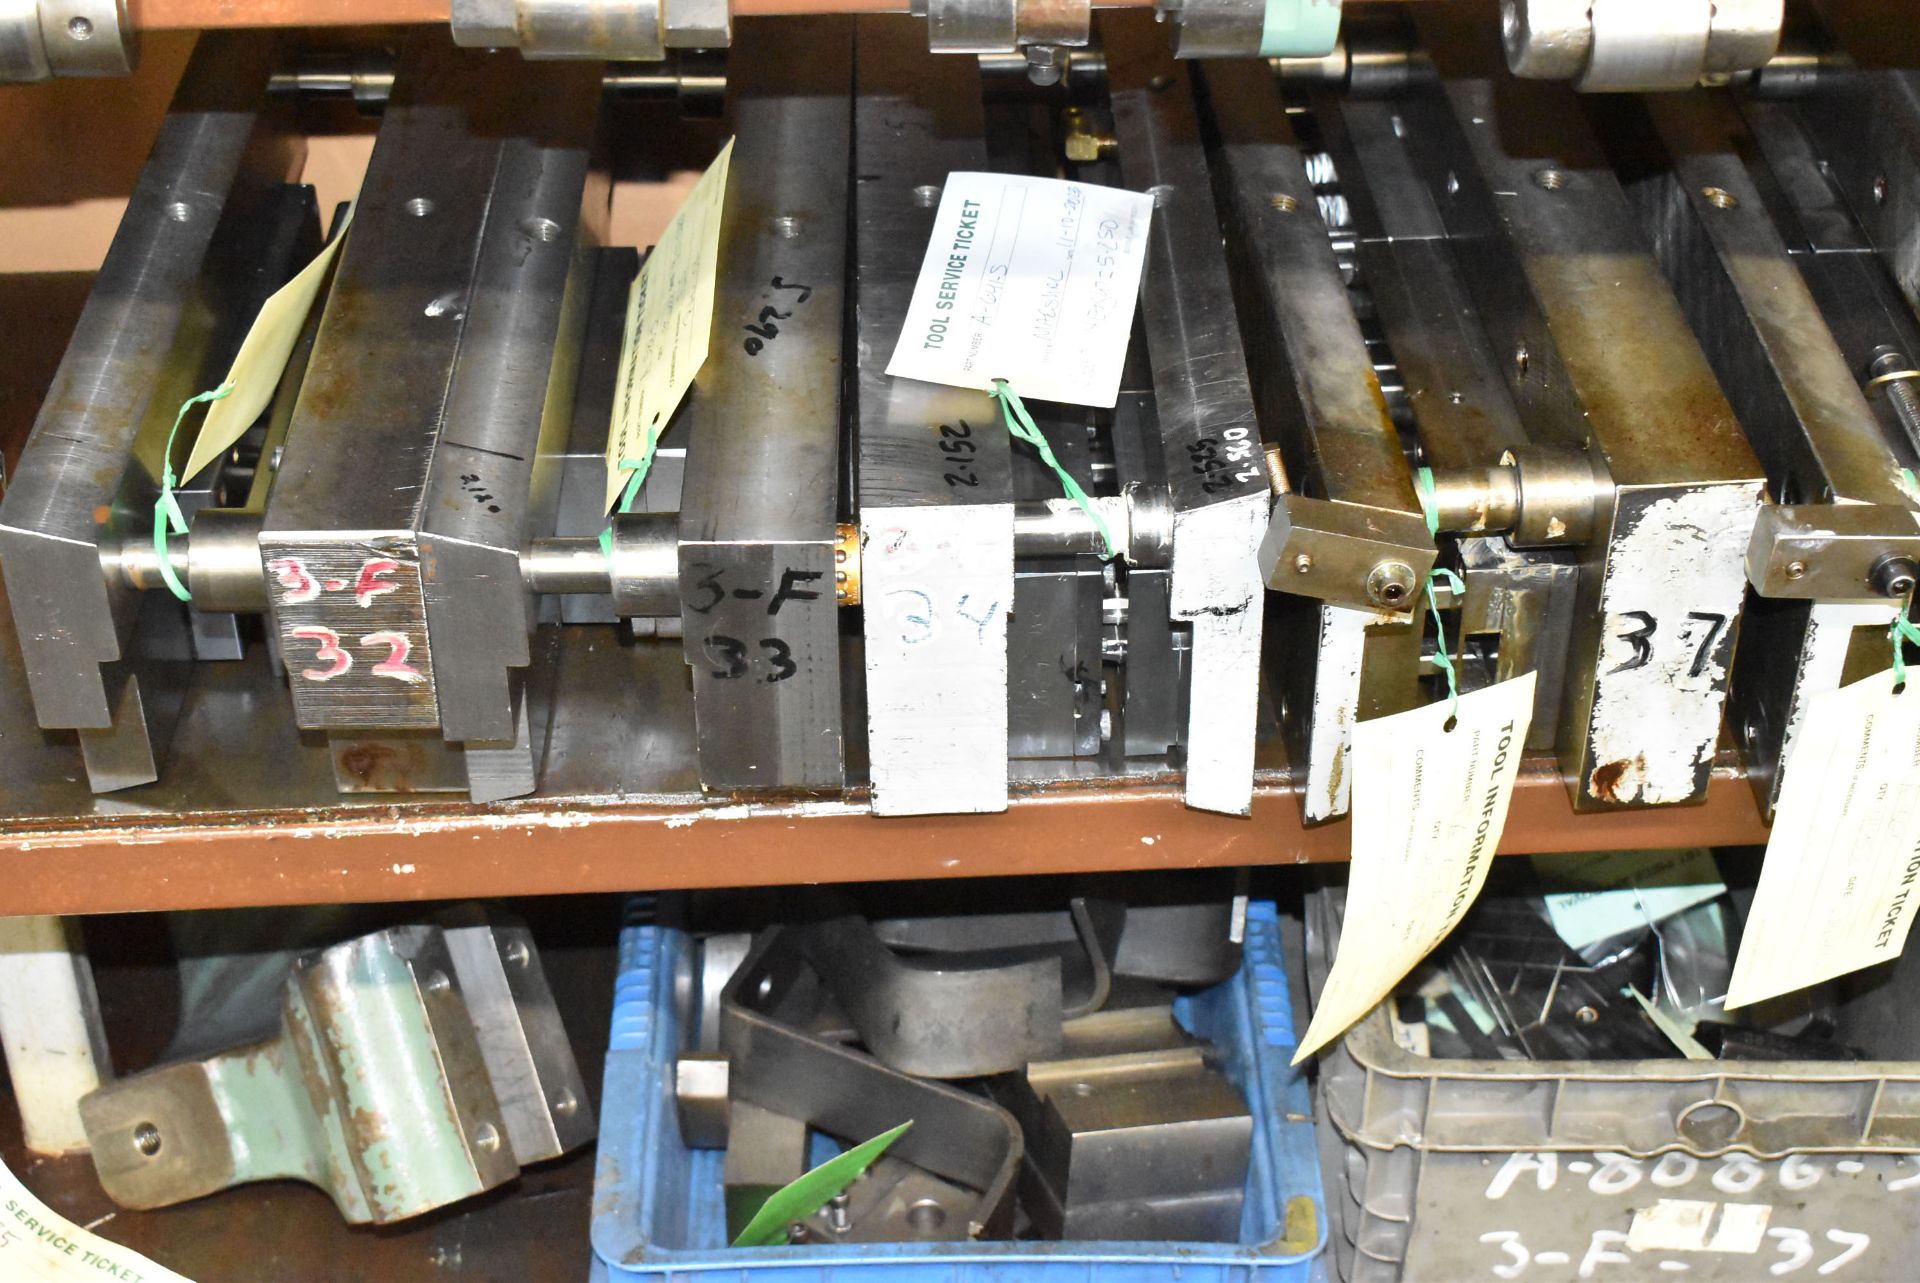 LOT/ CONTENTS OF SHELF - FOUR SLIDE DIE SETS, CUTTER HEADS & TOOLING - Image 3 of 5